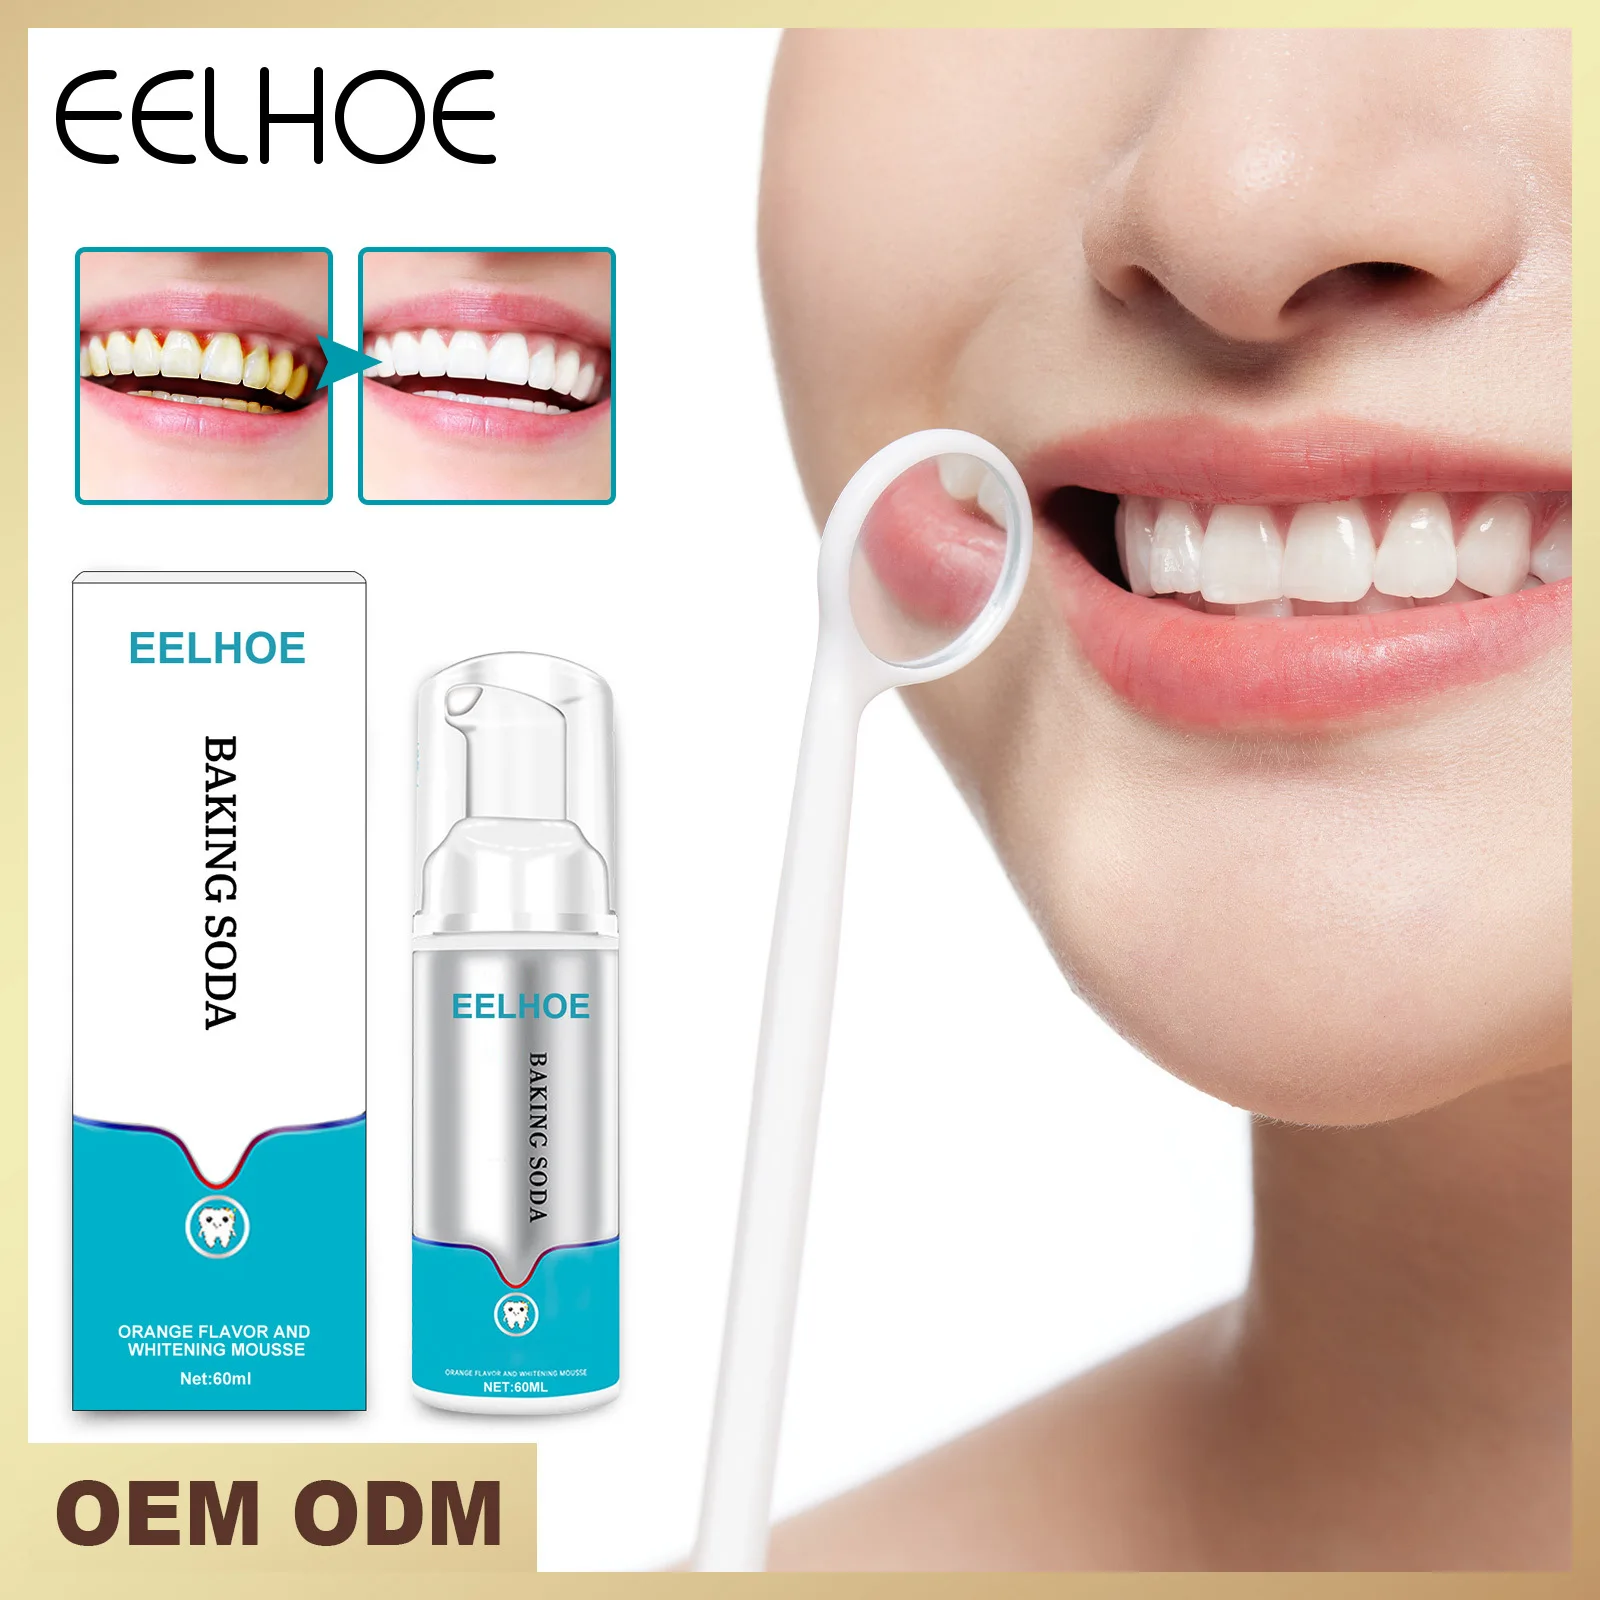 

EELHOE Cleansing Whitening Mousse Foam Toothpaste Remove Yellow Tartar Smoke Stains Fresh Breath Fight Bleeding Clean Oral Care